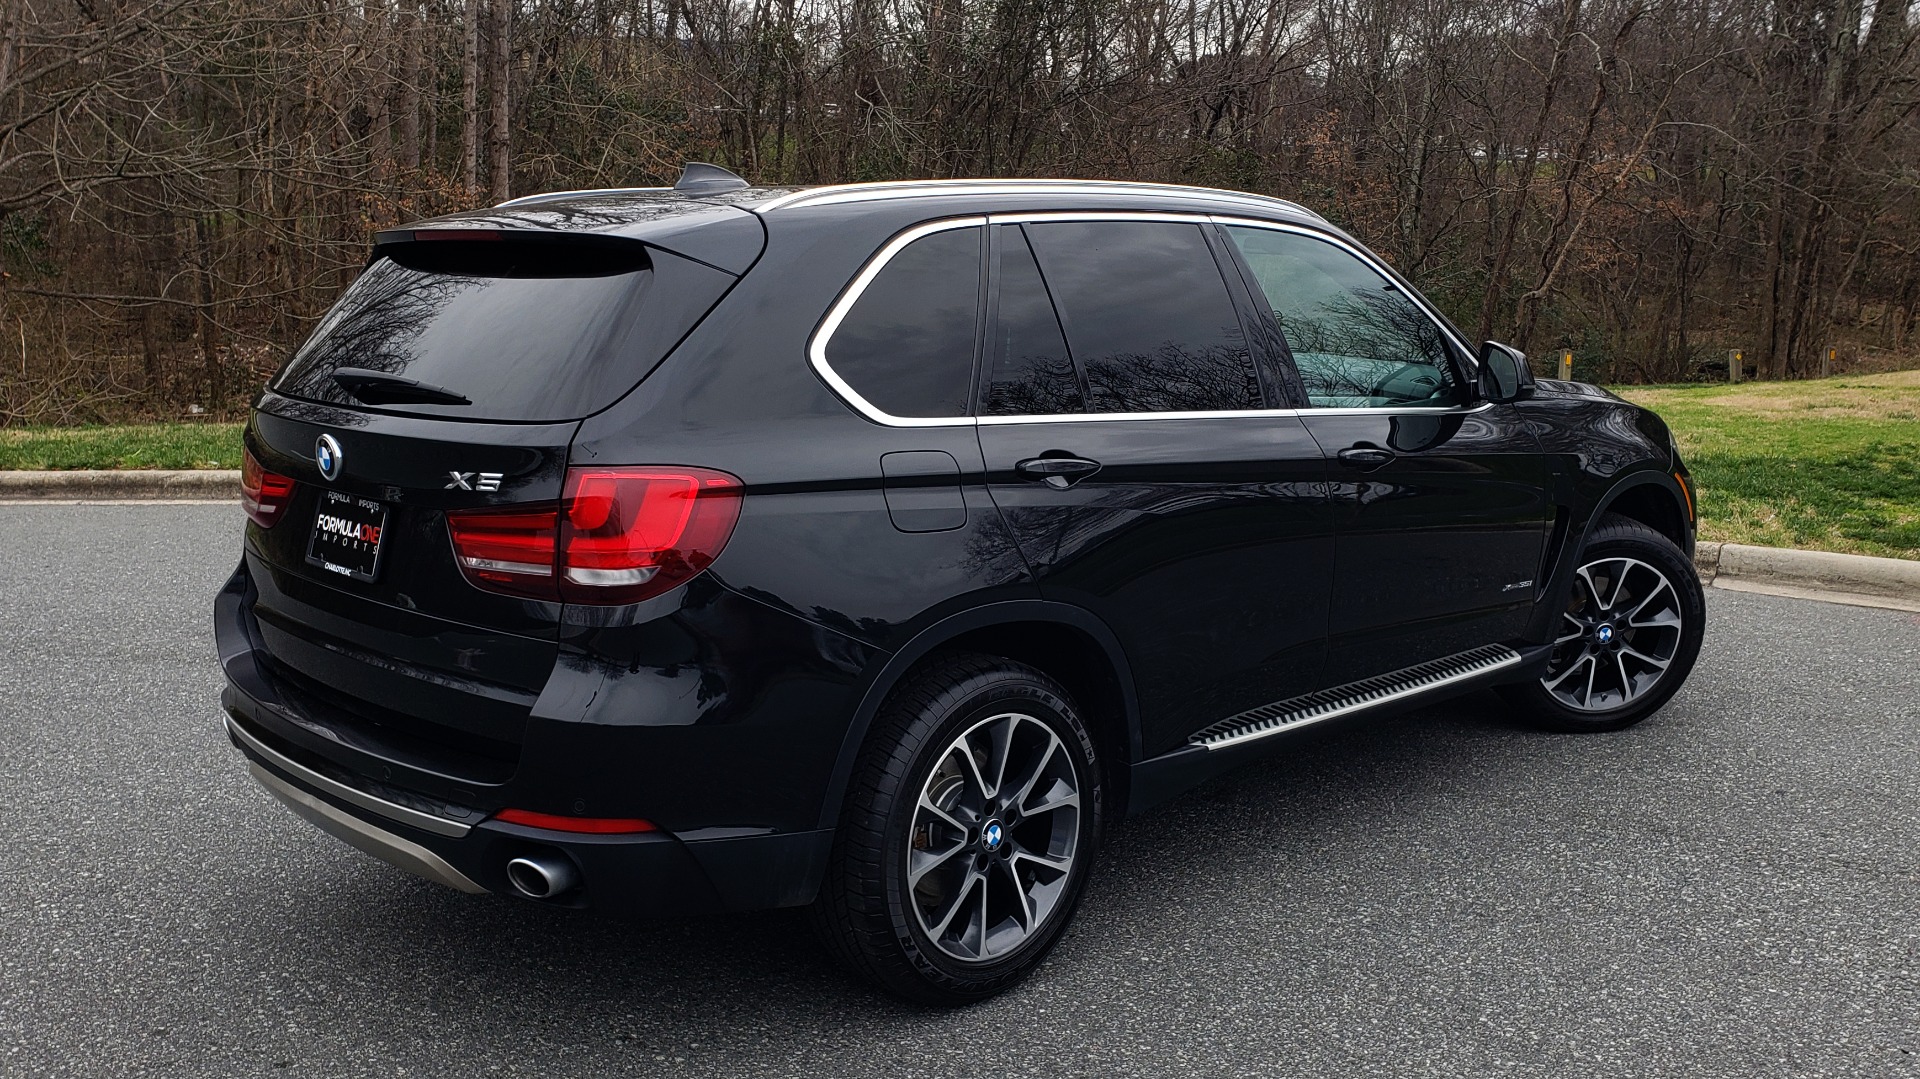 Used 2017 BMW X5 XDRIVE35I / PREMIUM PKG / CLD WTHR / REARVIEW for sale Sold at Formula Imports in Charlotte NC 28227 6